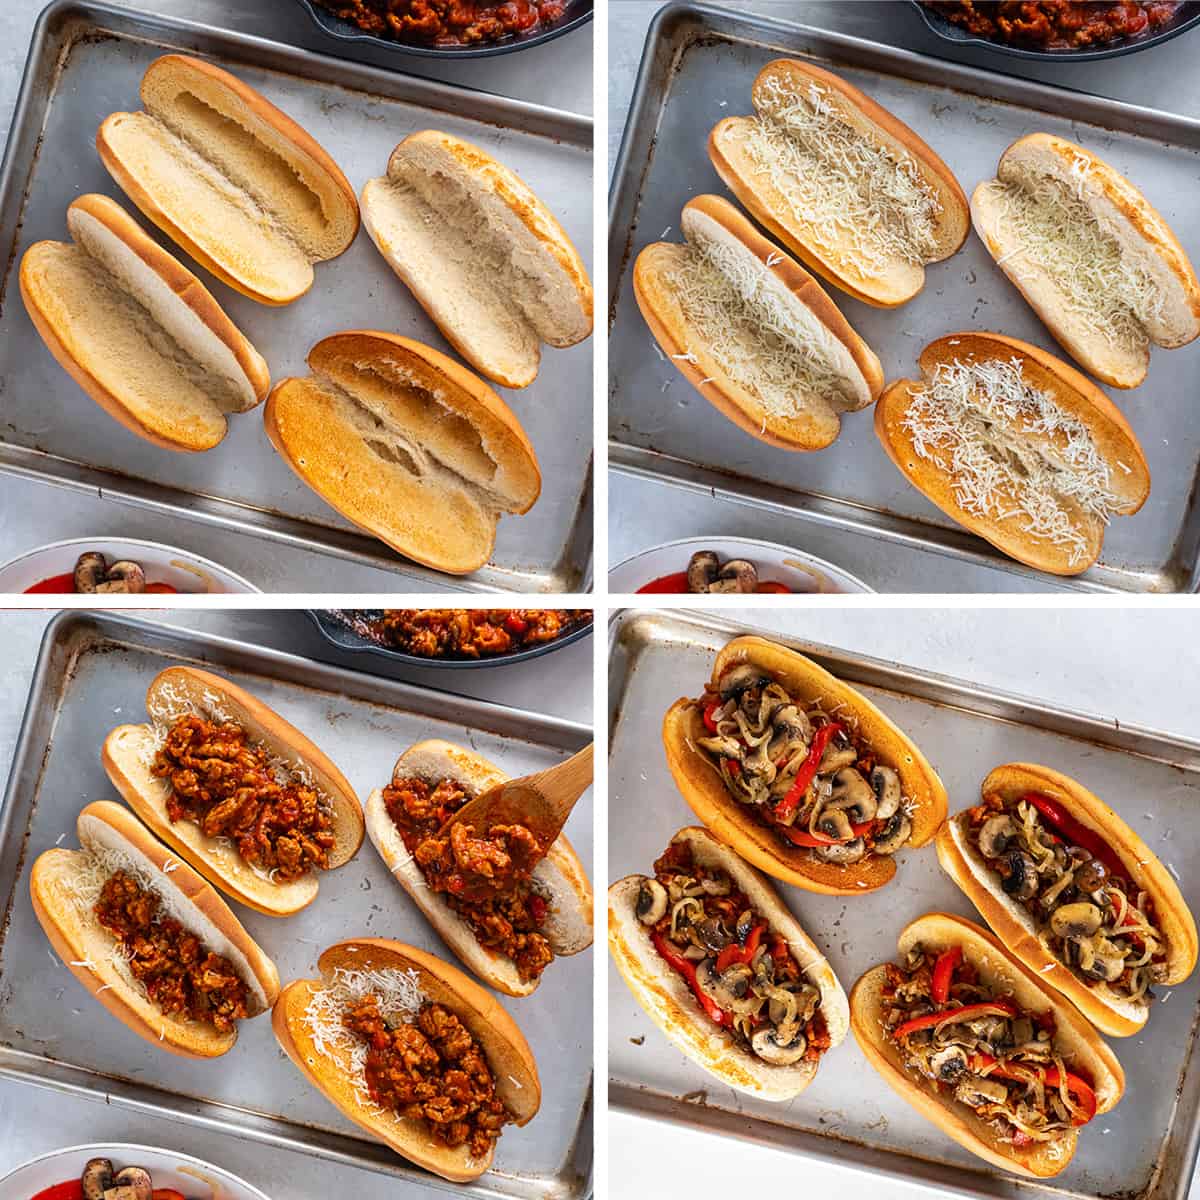 Four images showing cheese, Italian sausage, peppers, onions, and mushrooms being layered in toasted hoagie rolls.